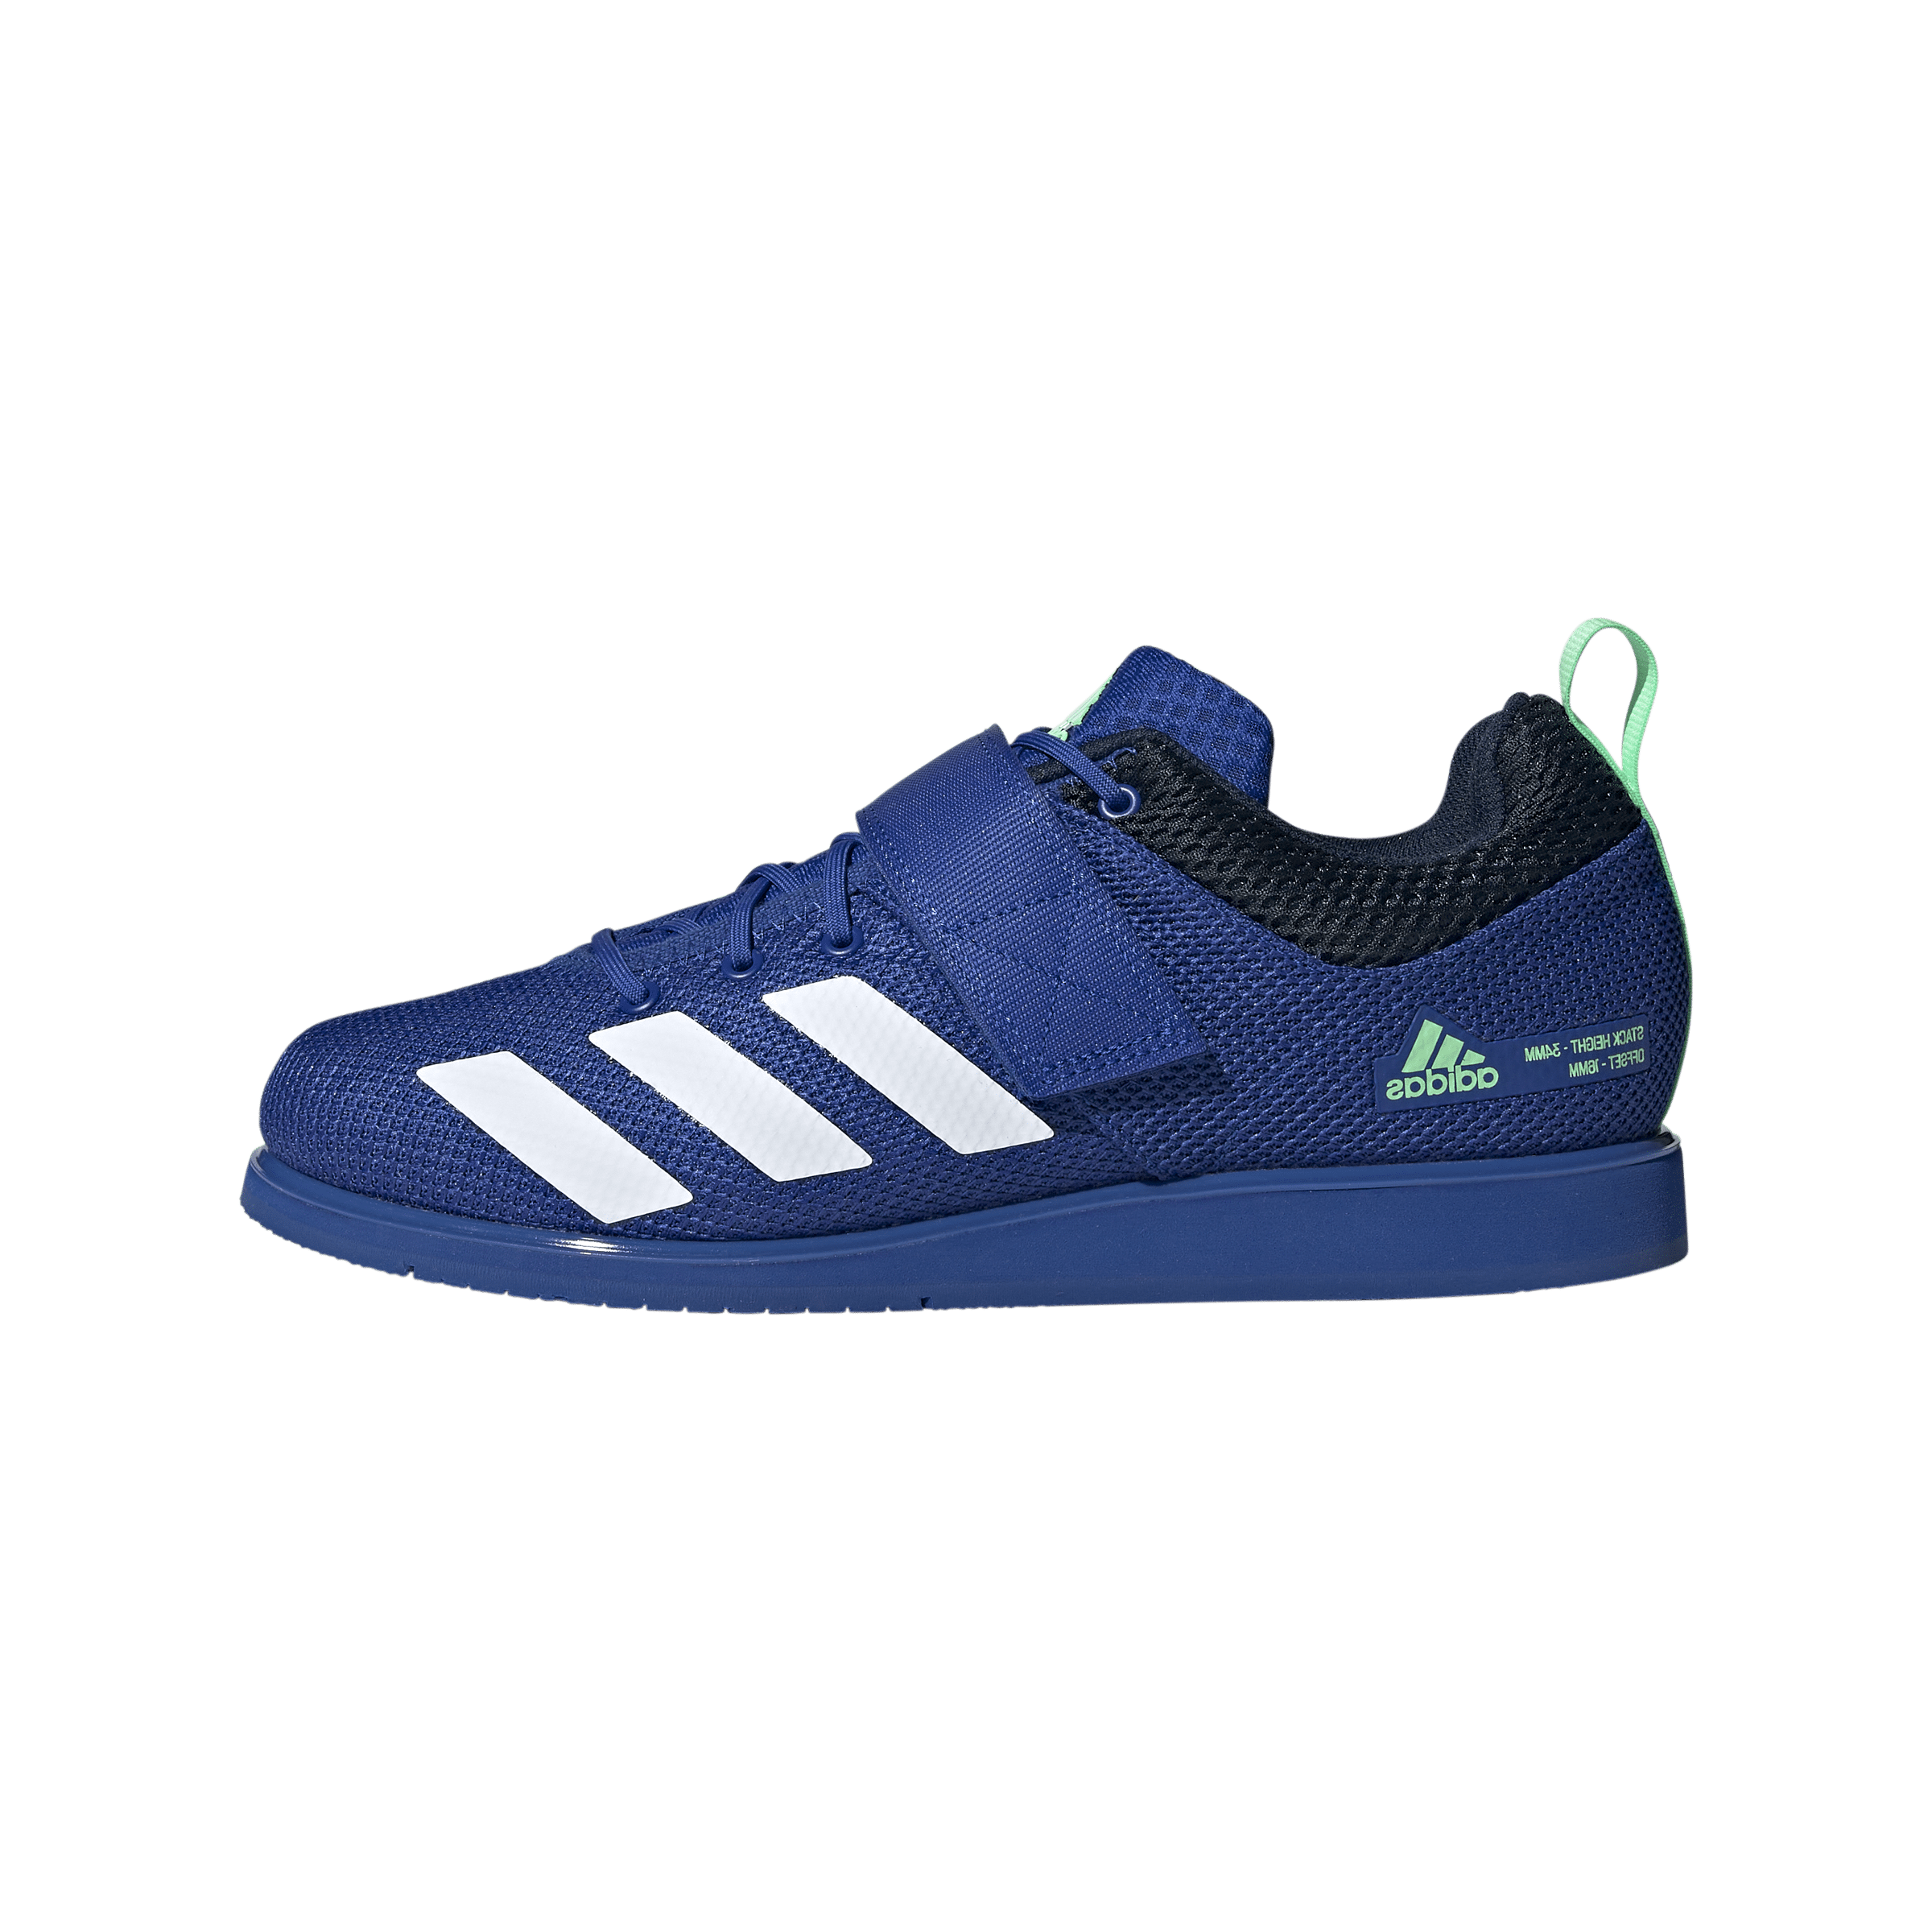 Adidas Powerlift 5 Lifting Shoes in Royal Blue